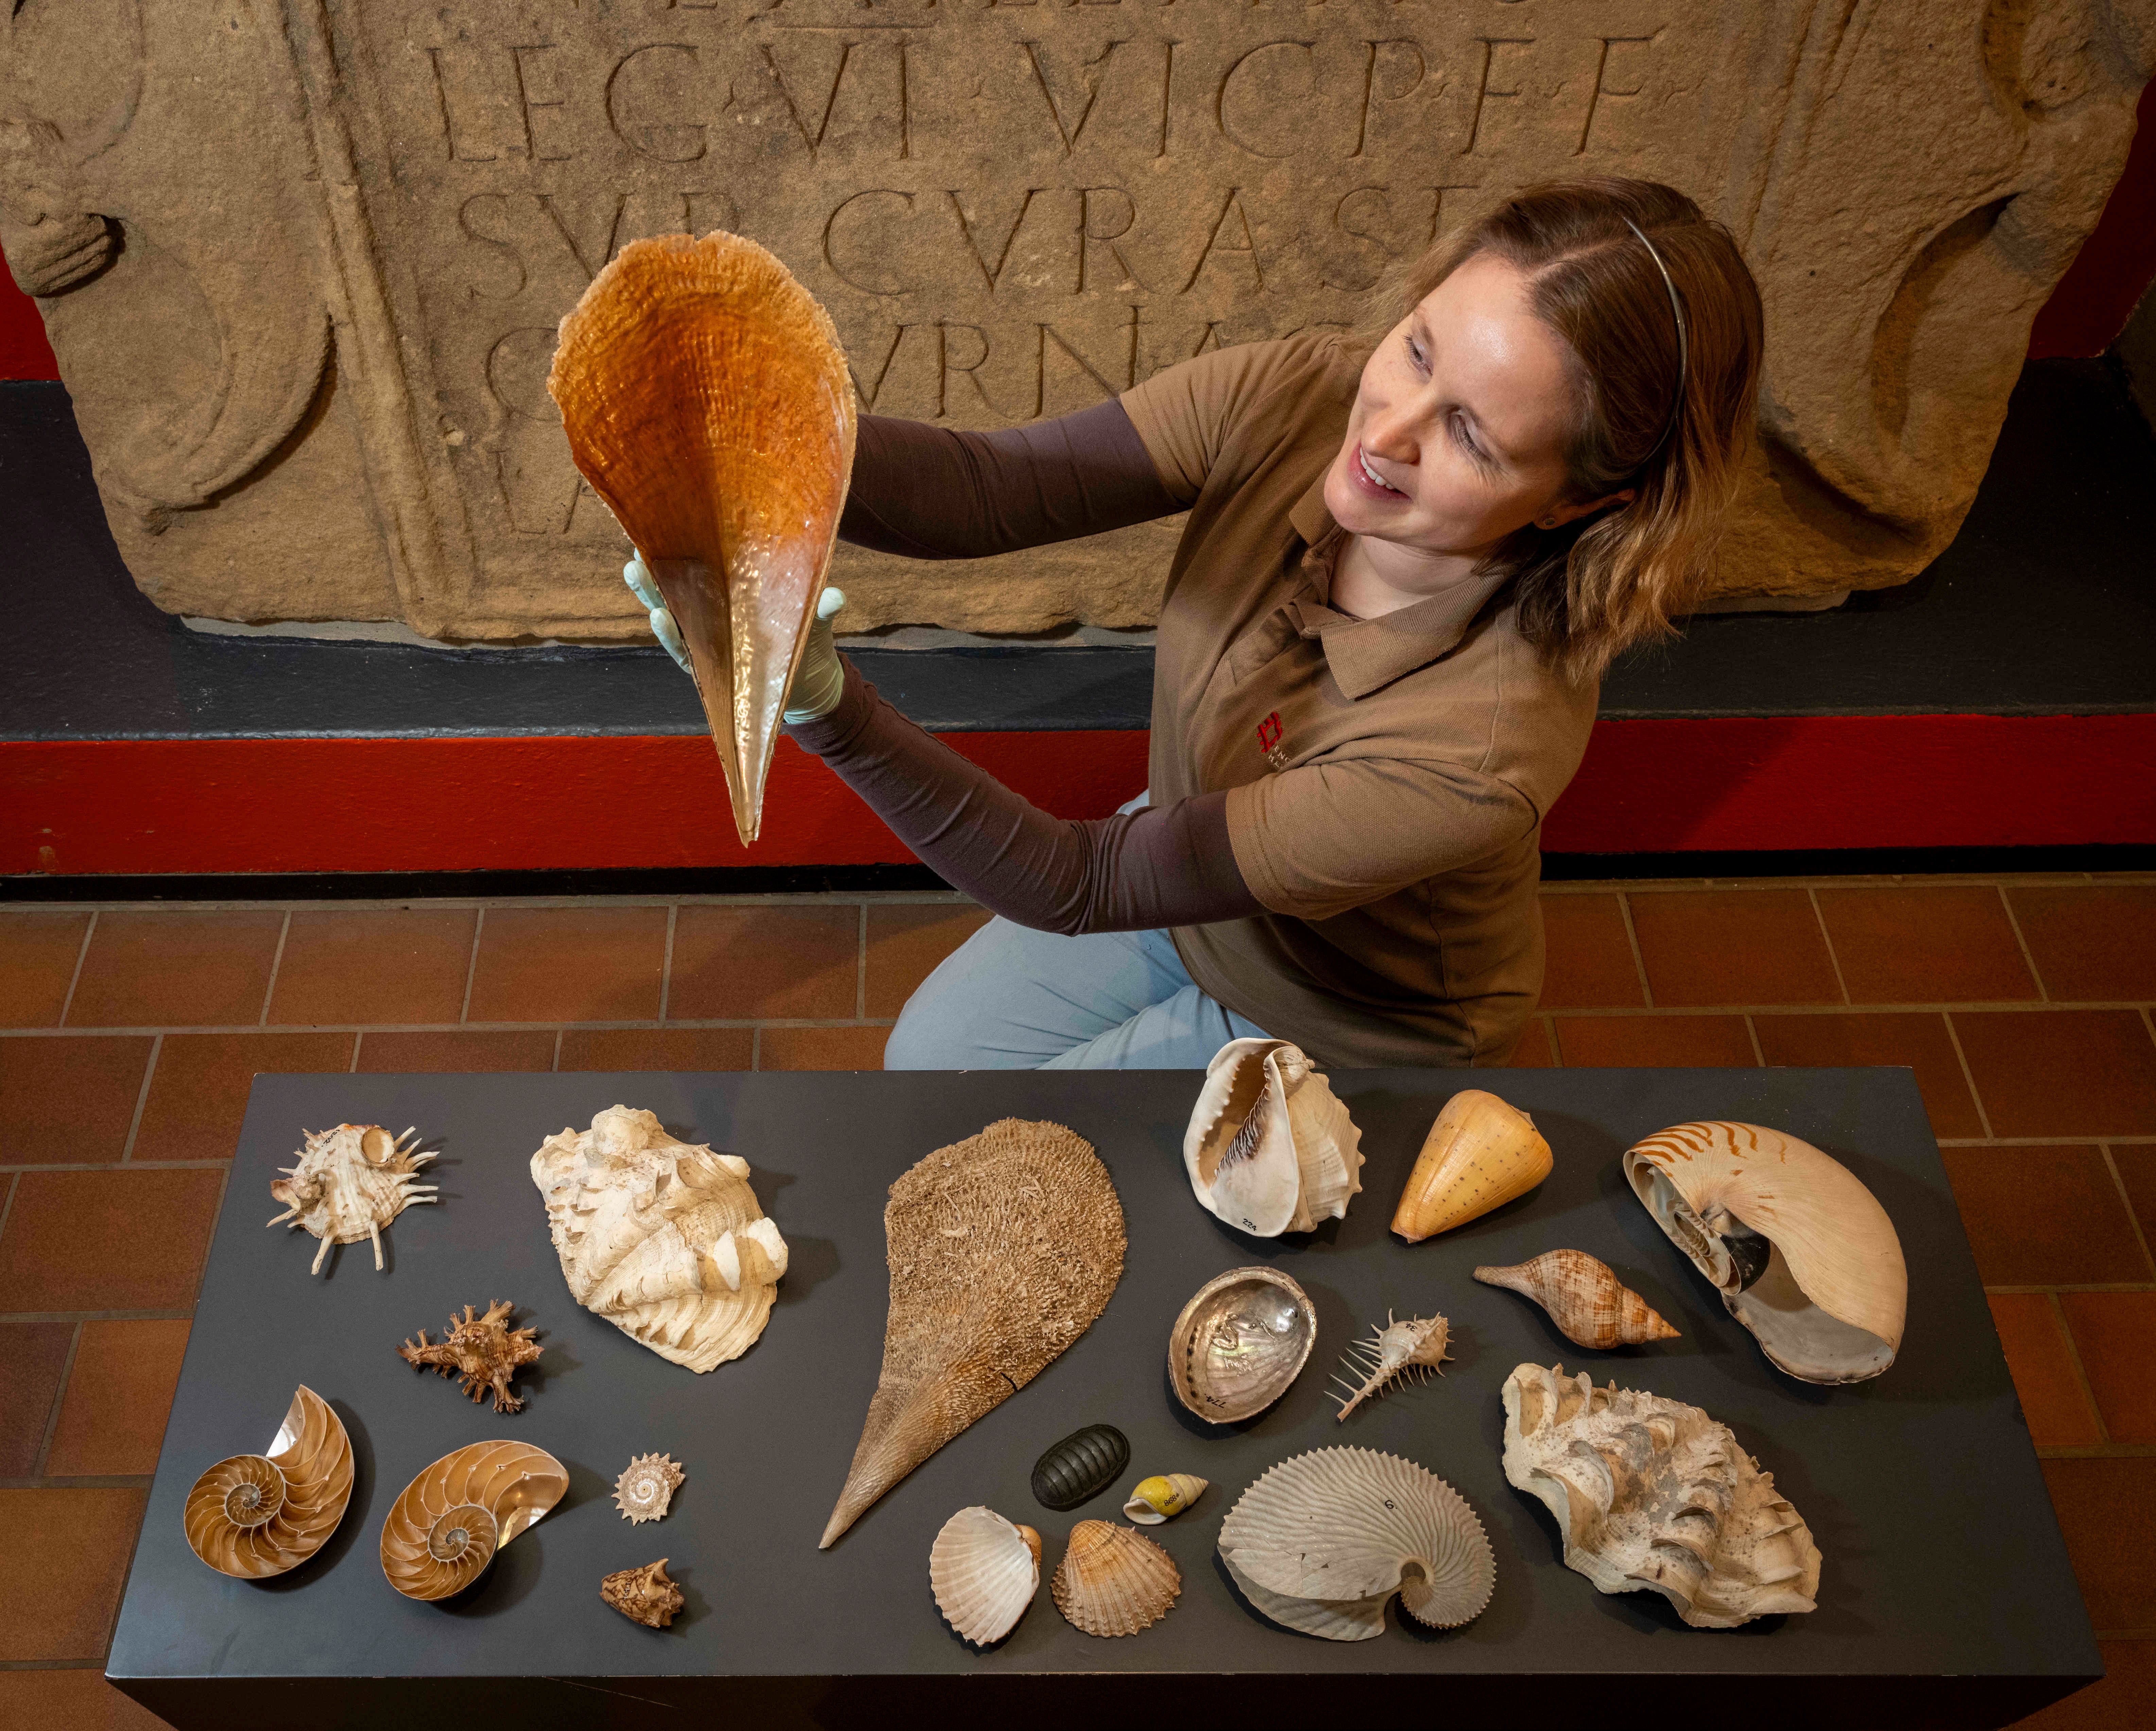 The 18th century shell collection from Captain James Cook’s third voyage